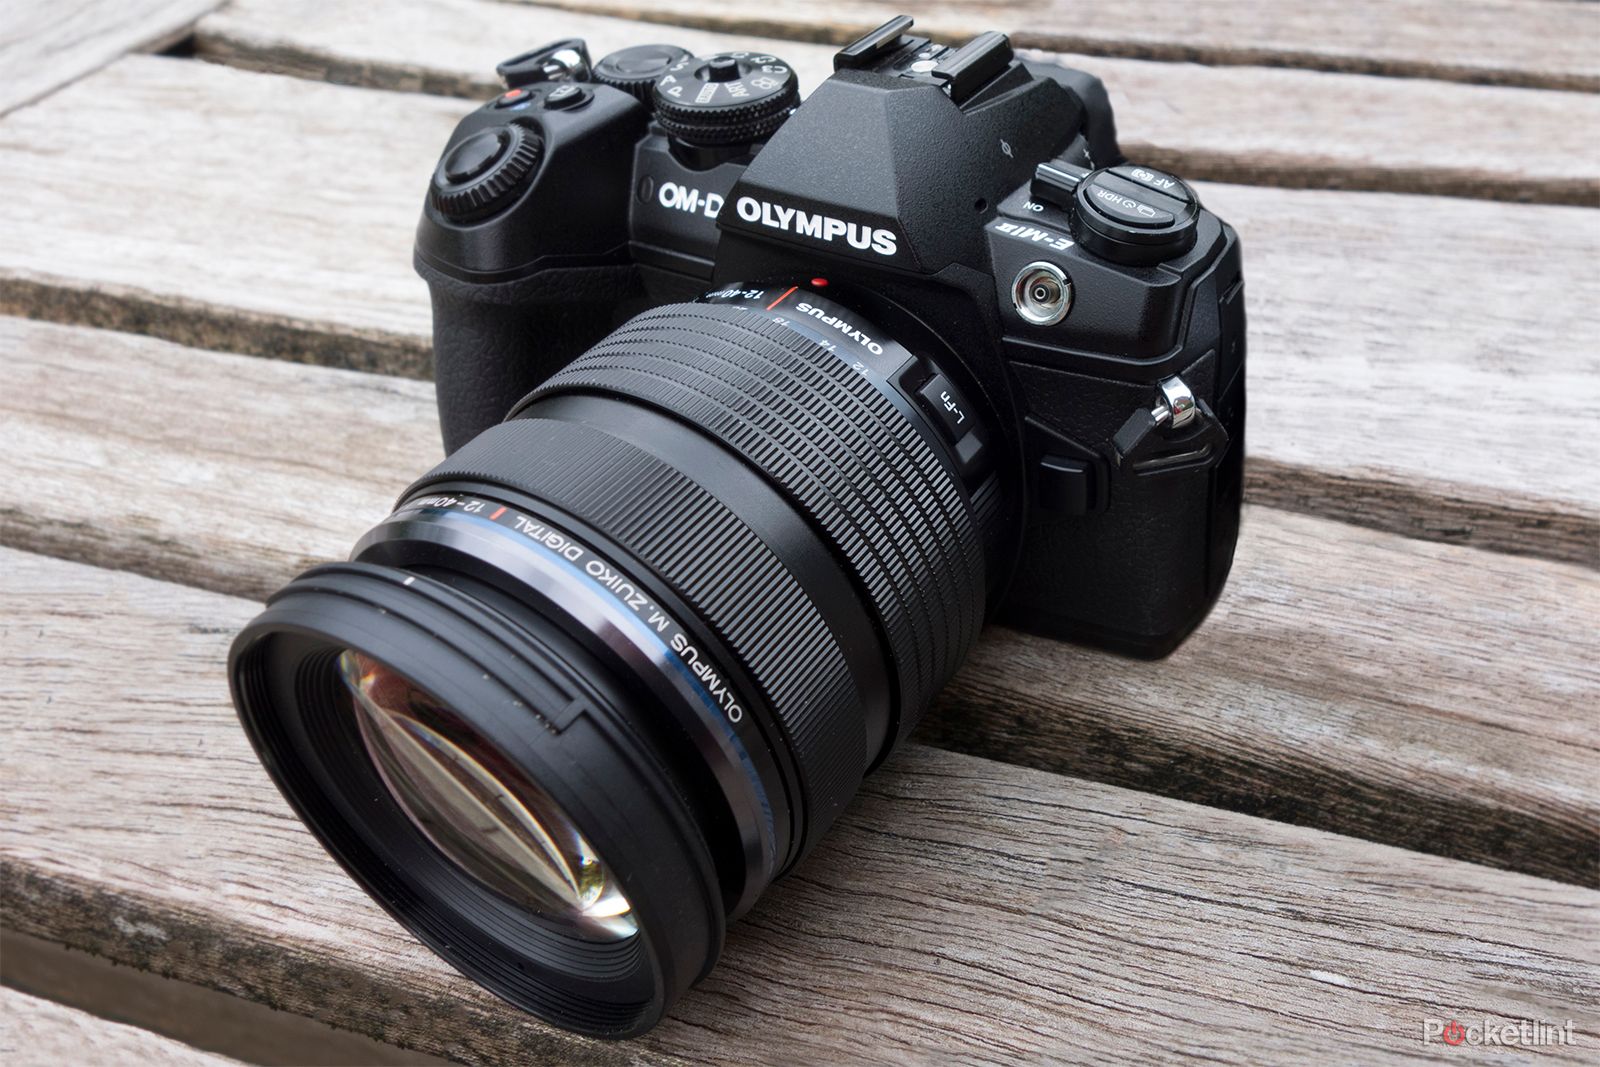 Olympus OM-D E-M1 Mark II review: The most formidable Olympus